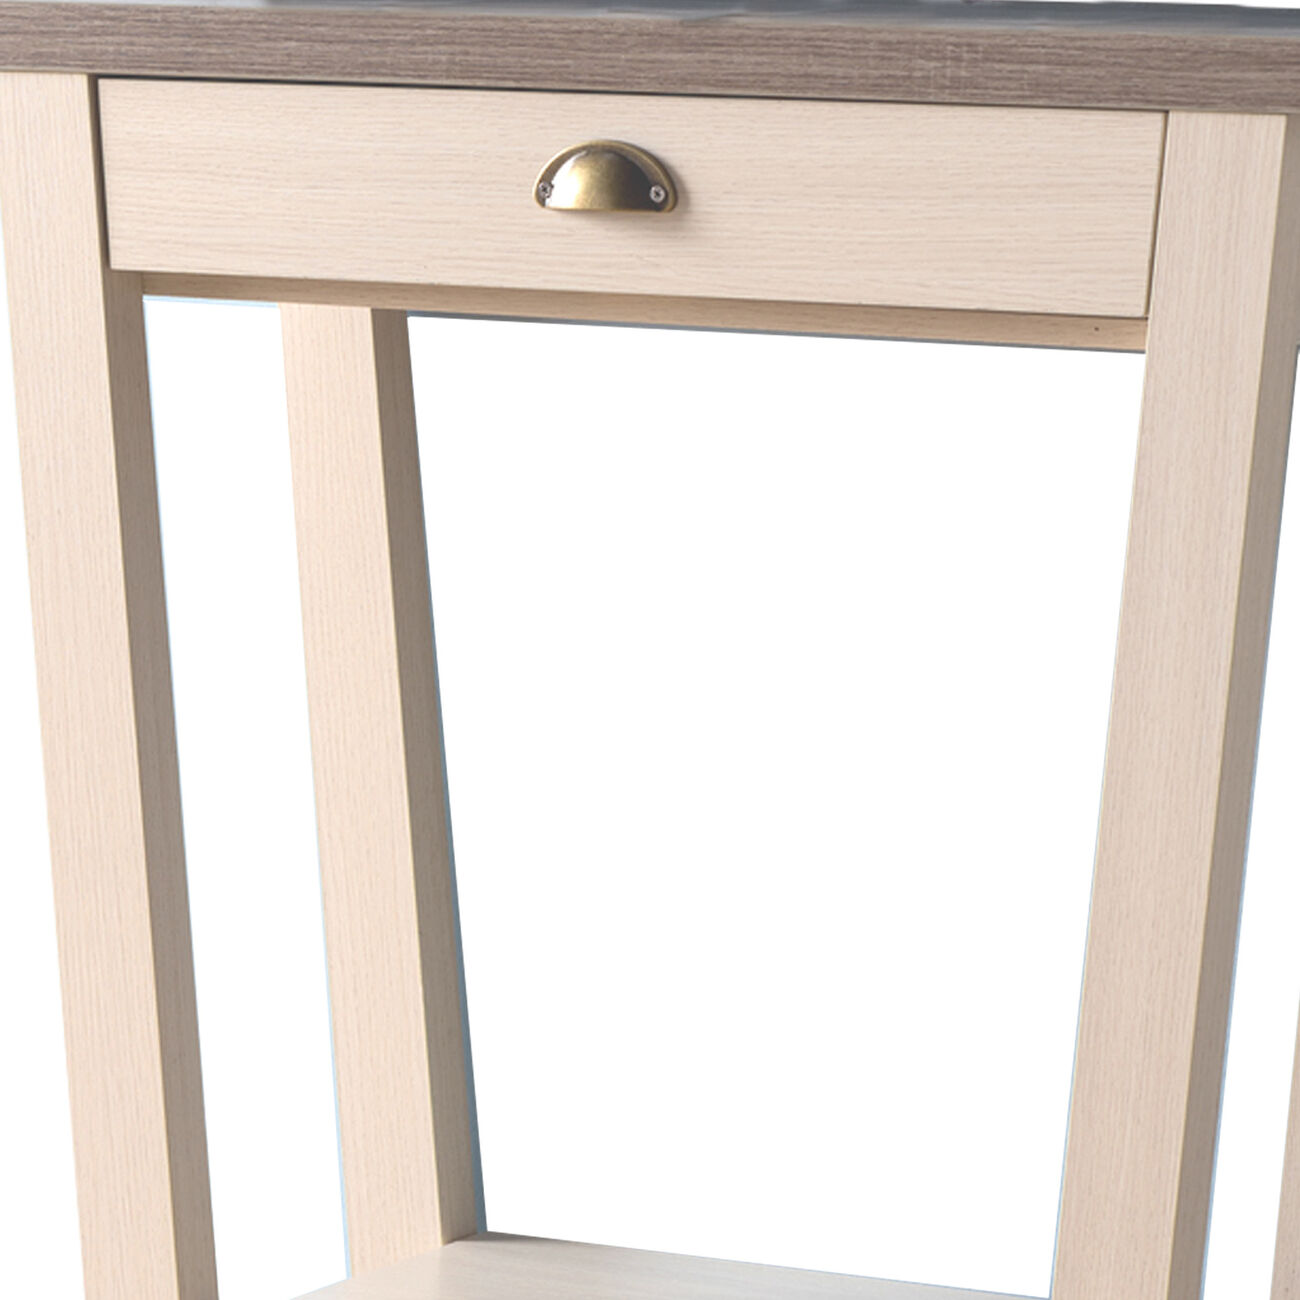 Wooden Console Table with 1 Drawer and Slanted Legs, Brown and Off White